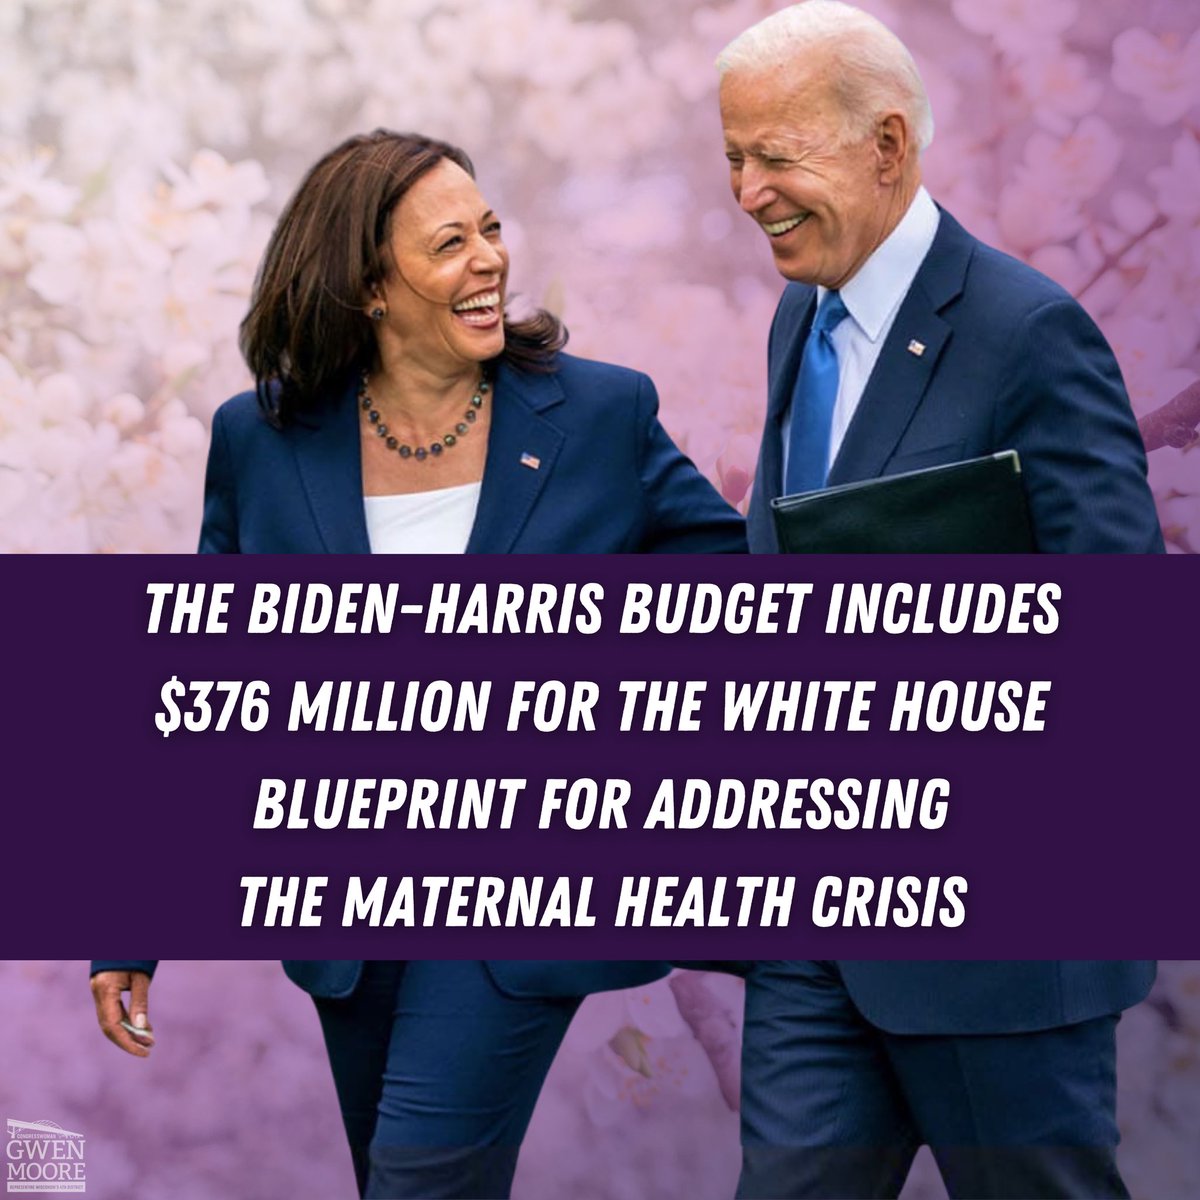 This #BlackMaternalHealthWeek, I’m celebrating the strides made by the Biden-Harris administration in combatting the maternal health crisis. Together we can ensure all moms and babies get the best health outcomes.